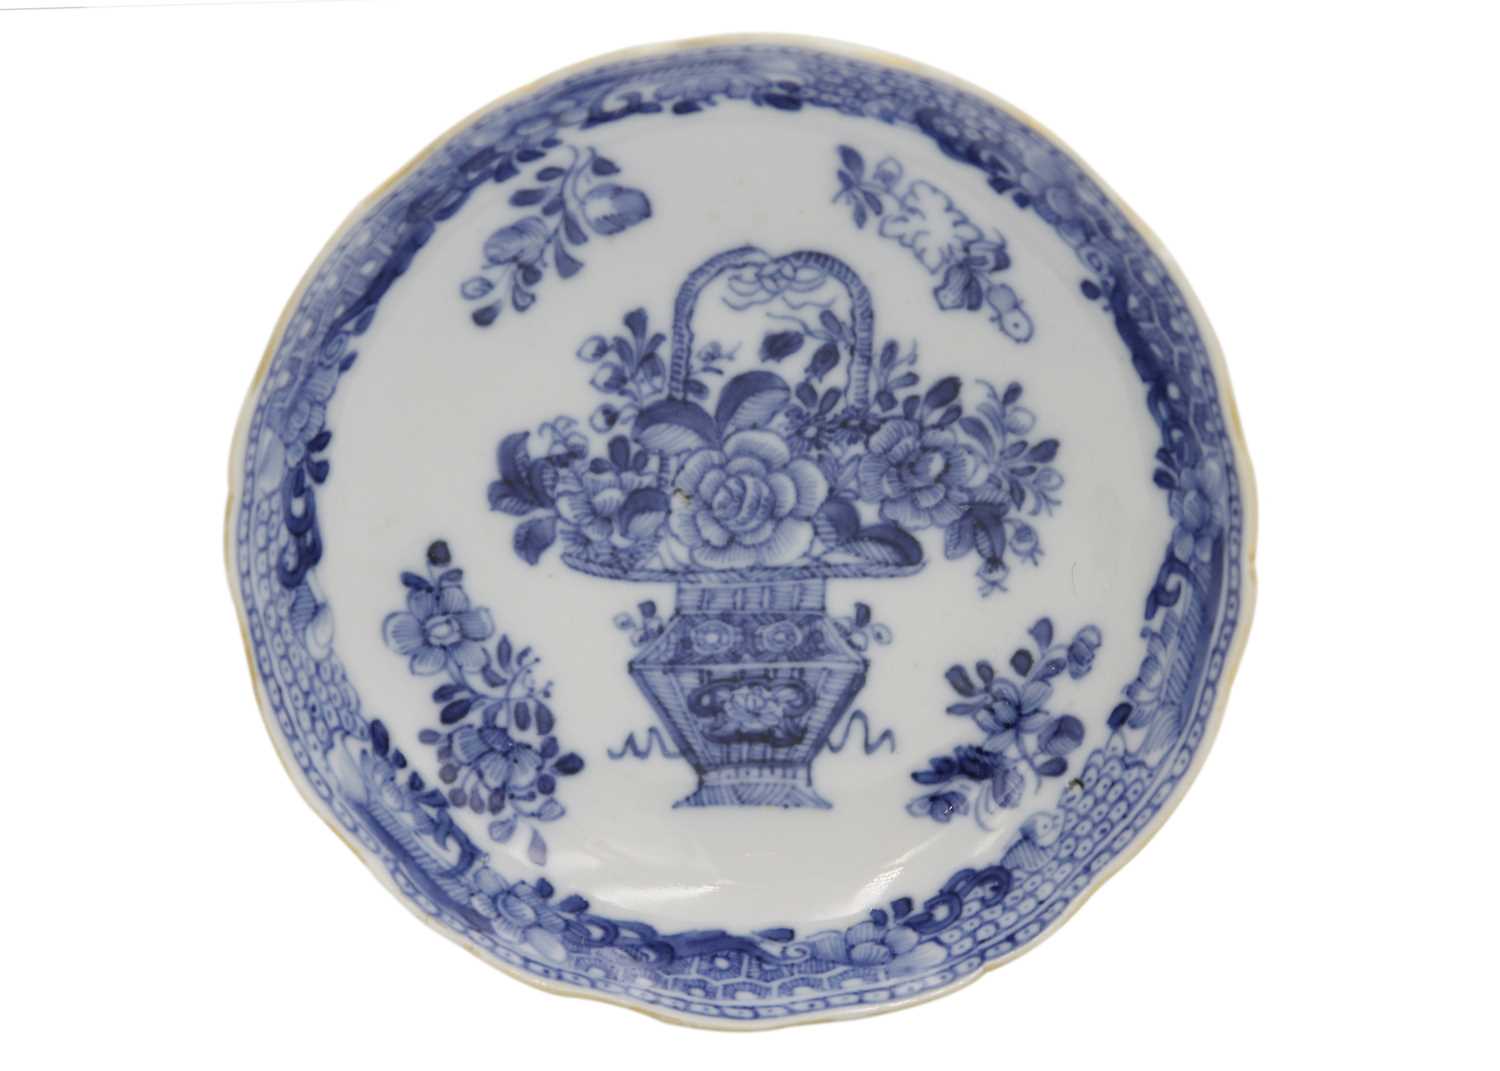 A pair of Chinese export blue and white porcelain dishes, 18th century. - Image 2 of 6